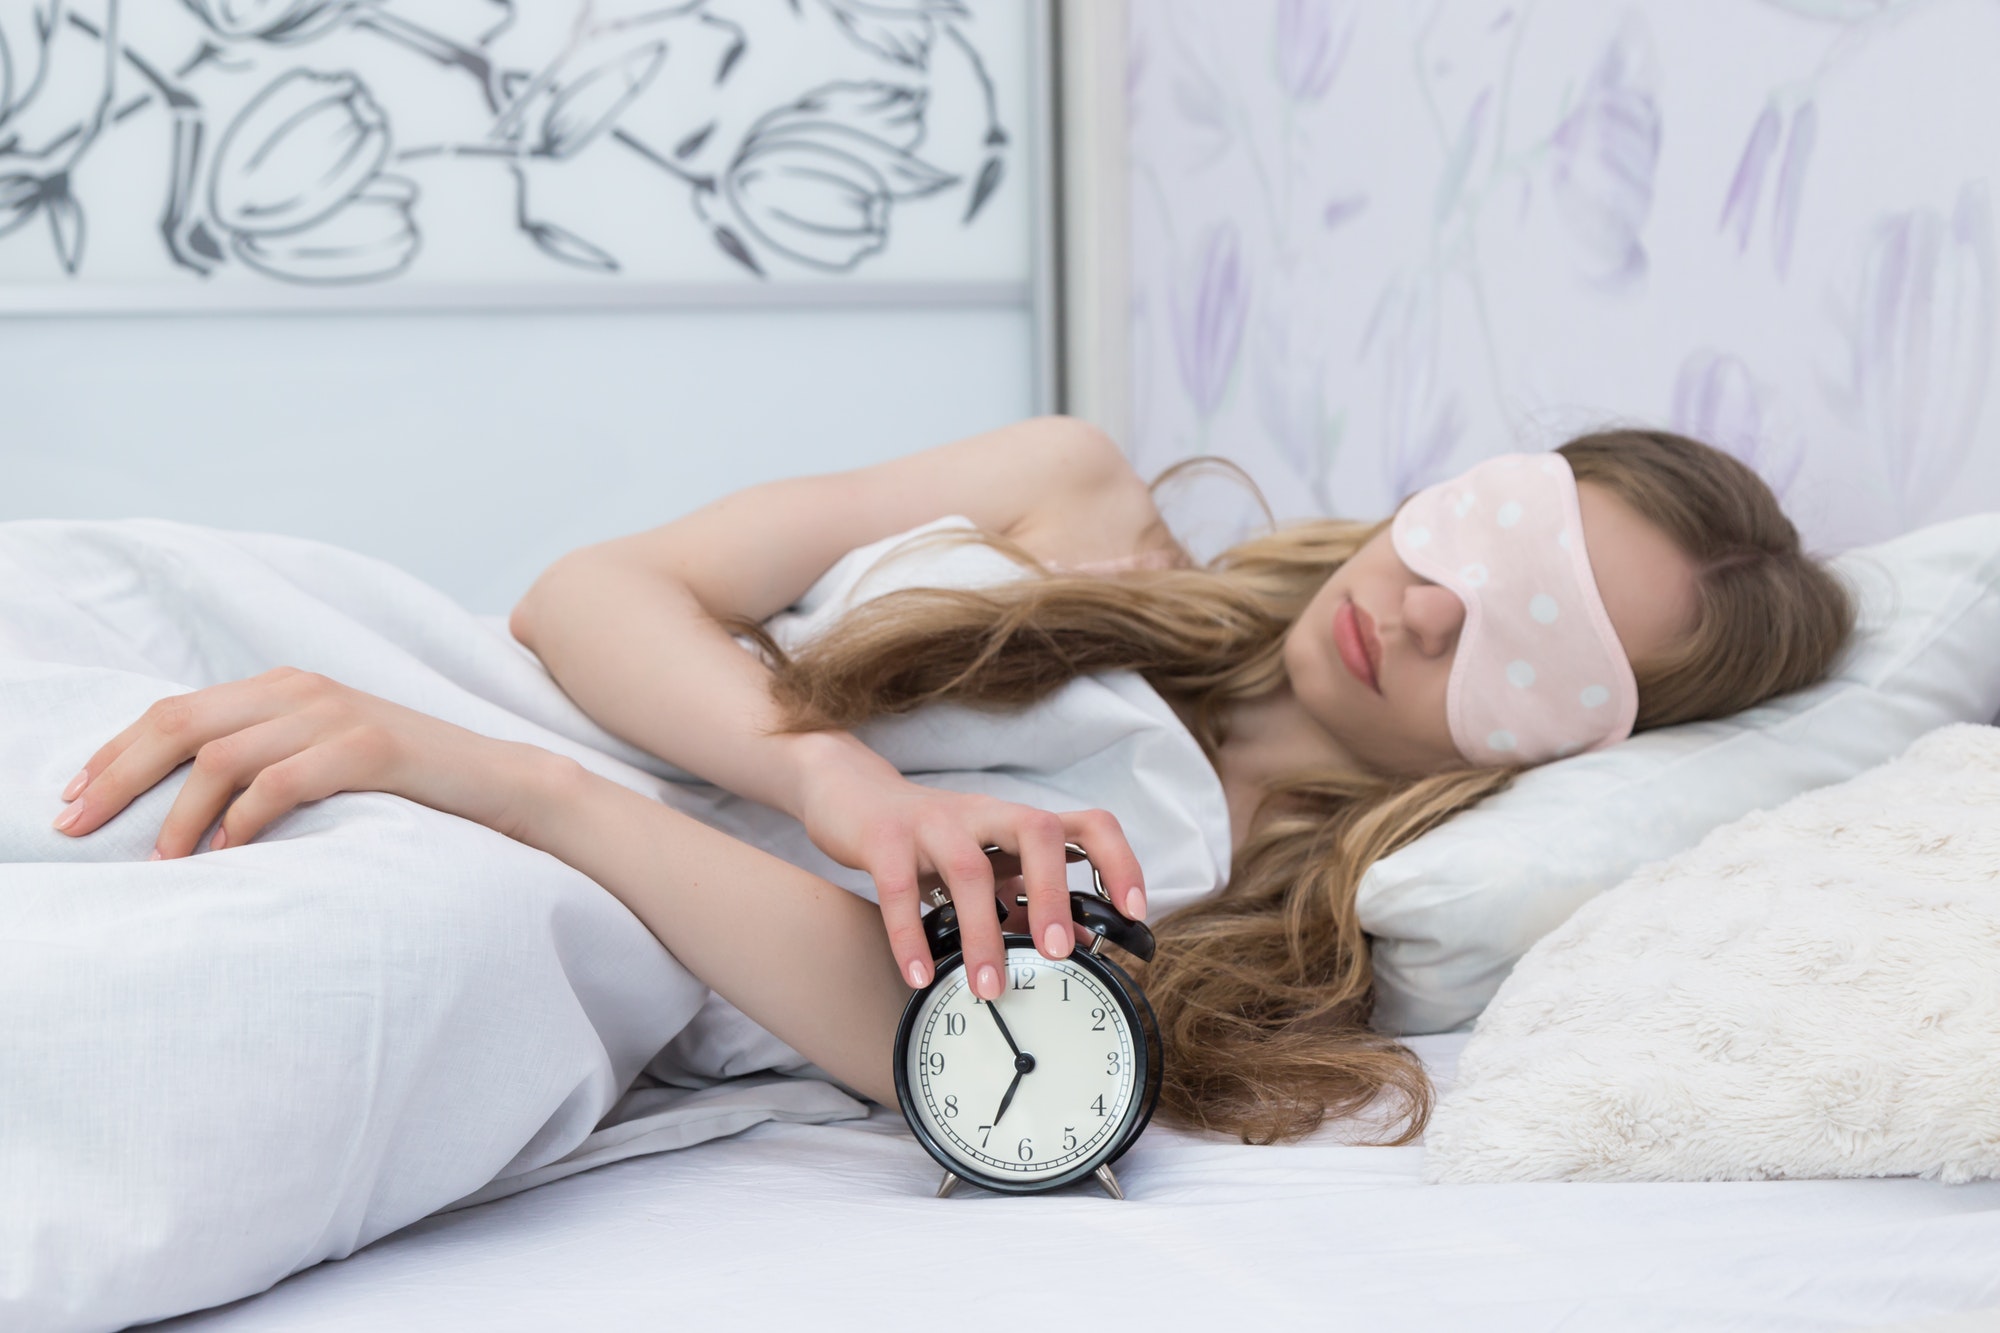 sleeping girl of European appearance with alarm clocks in her hands